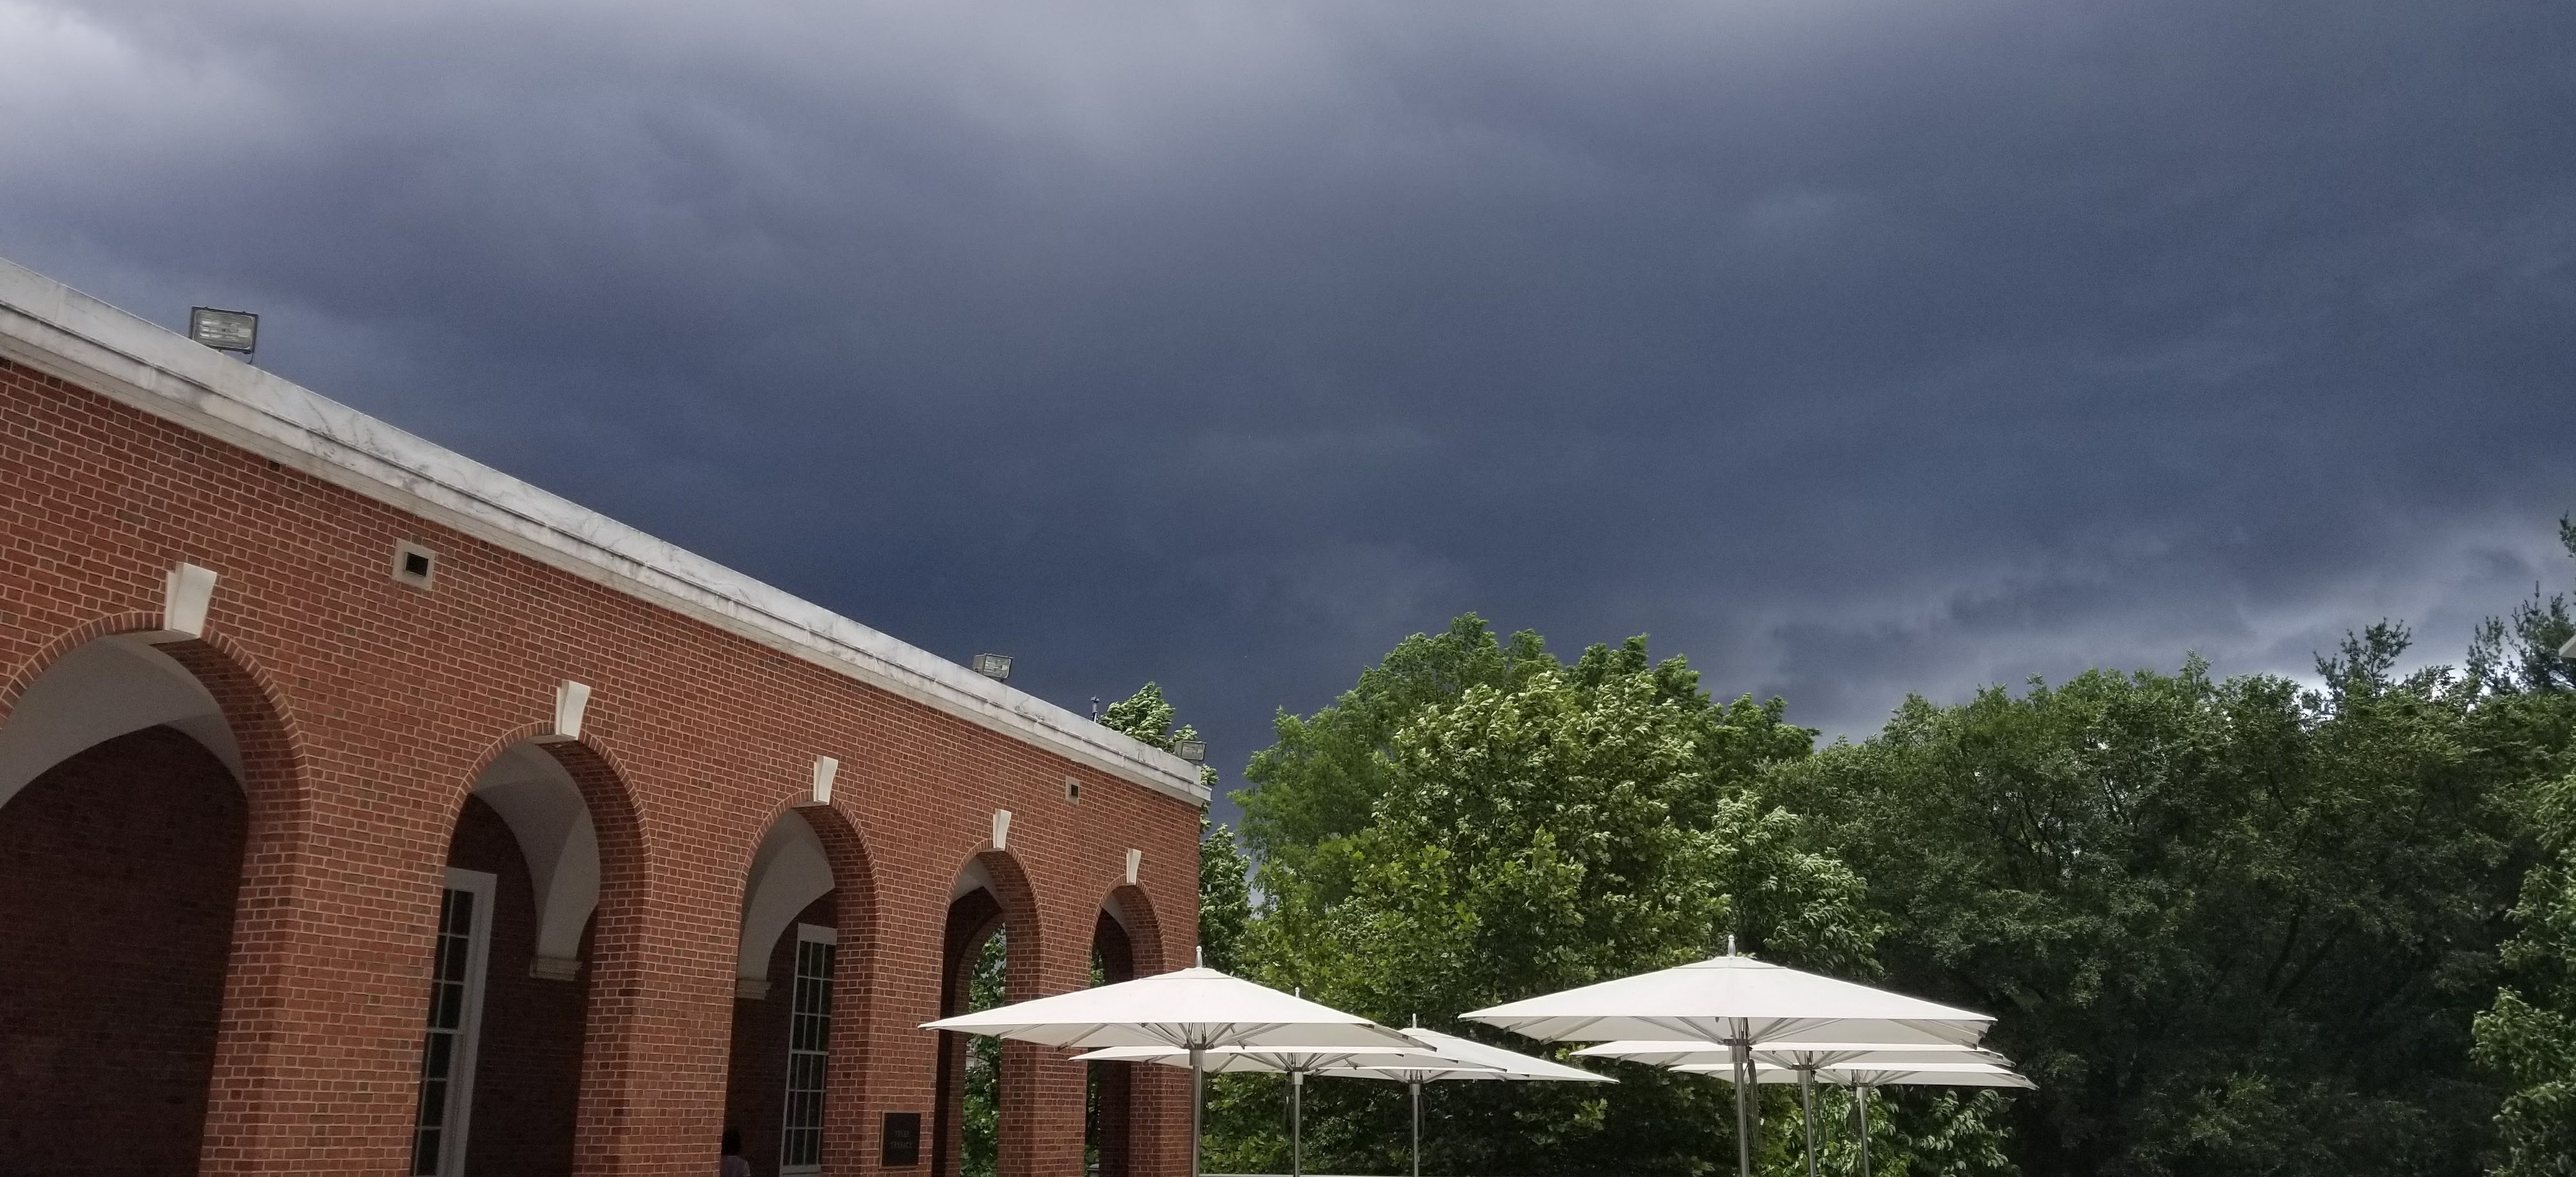 Brick archway and white umbrellas overshadowed by clouds.